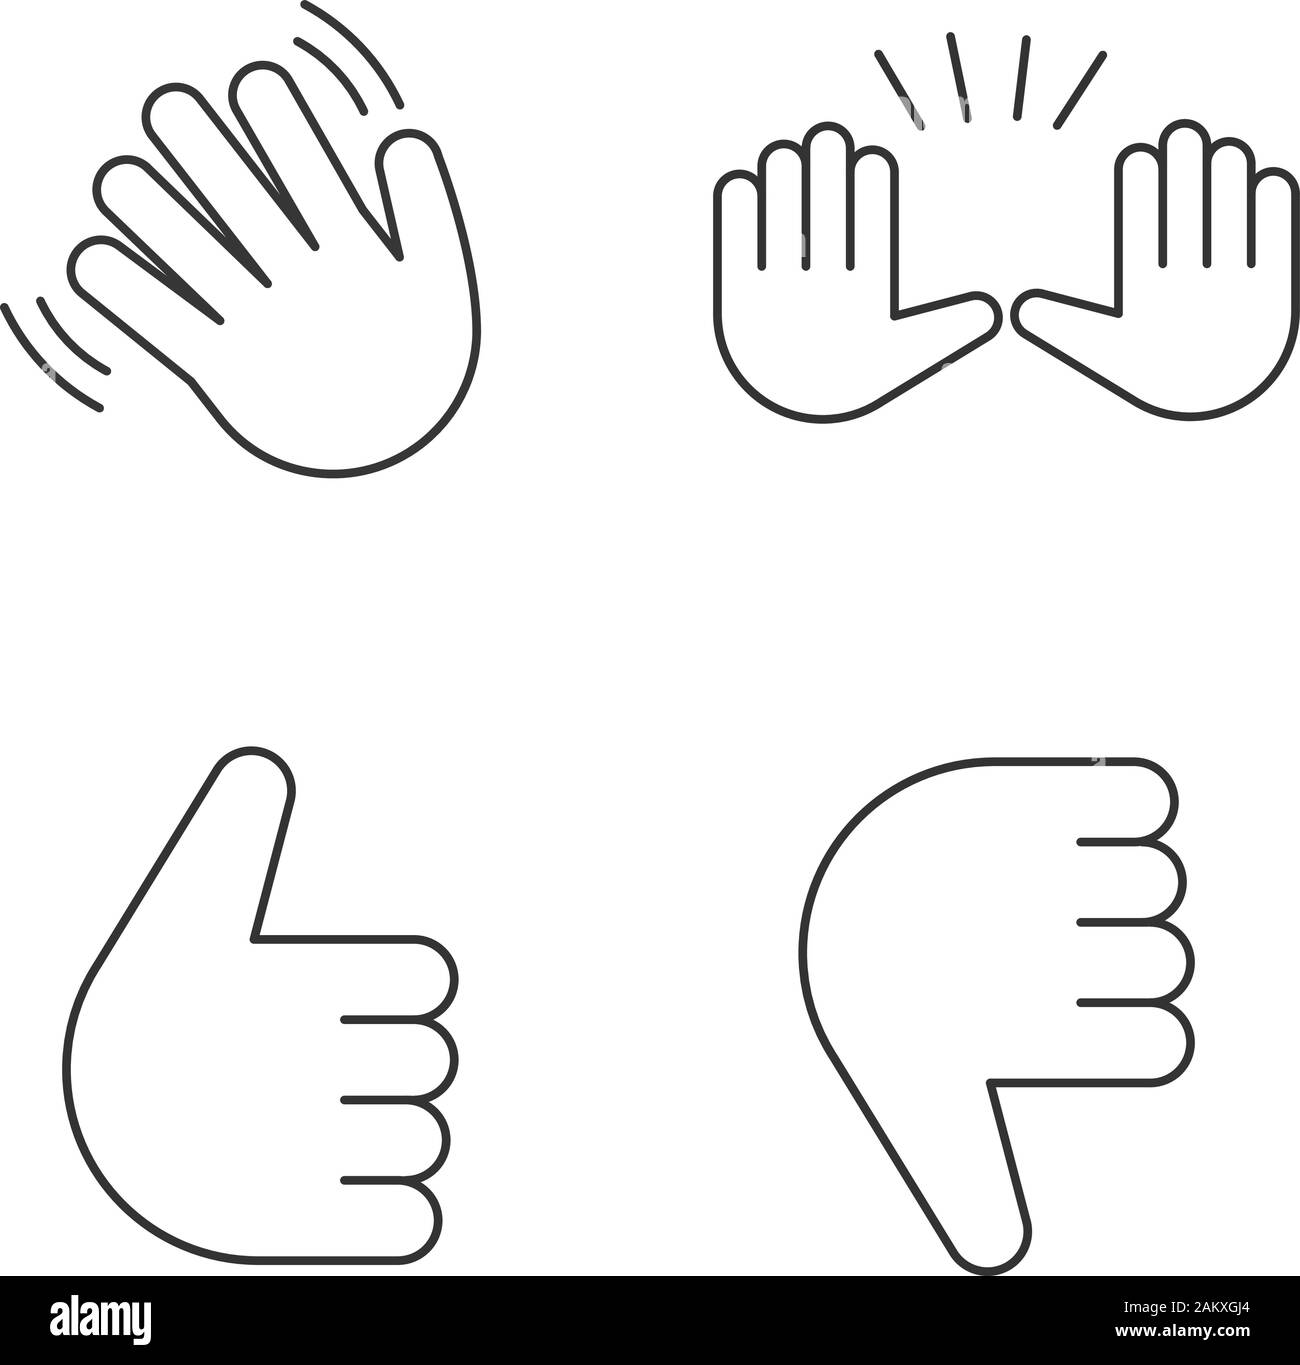 Hand gesture emojis linear icons set. Thin line contour symbols. Hello, goodbye, stop, good job, disapproval gesturing. Thumbs up and down. Isolated v Stock Vector